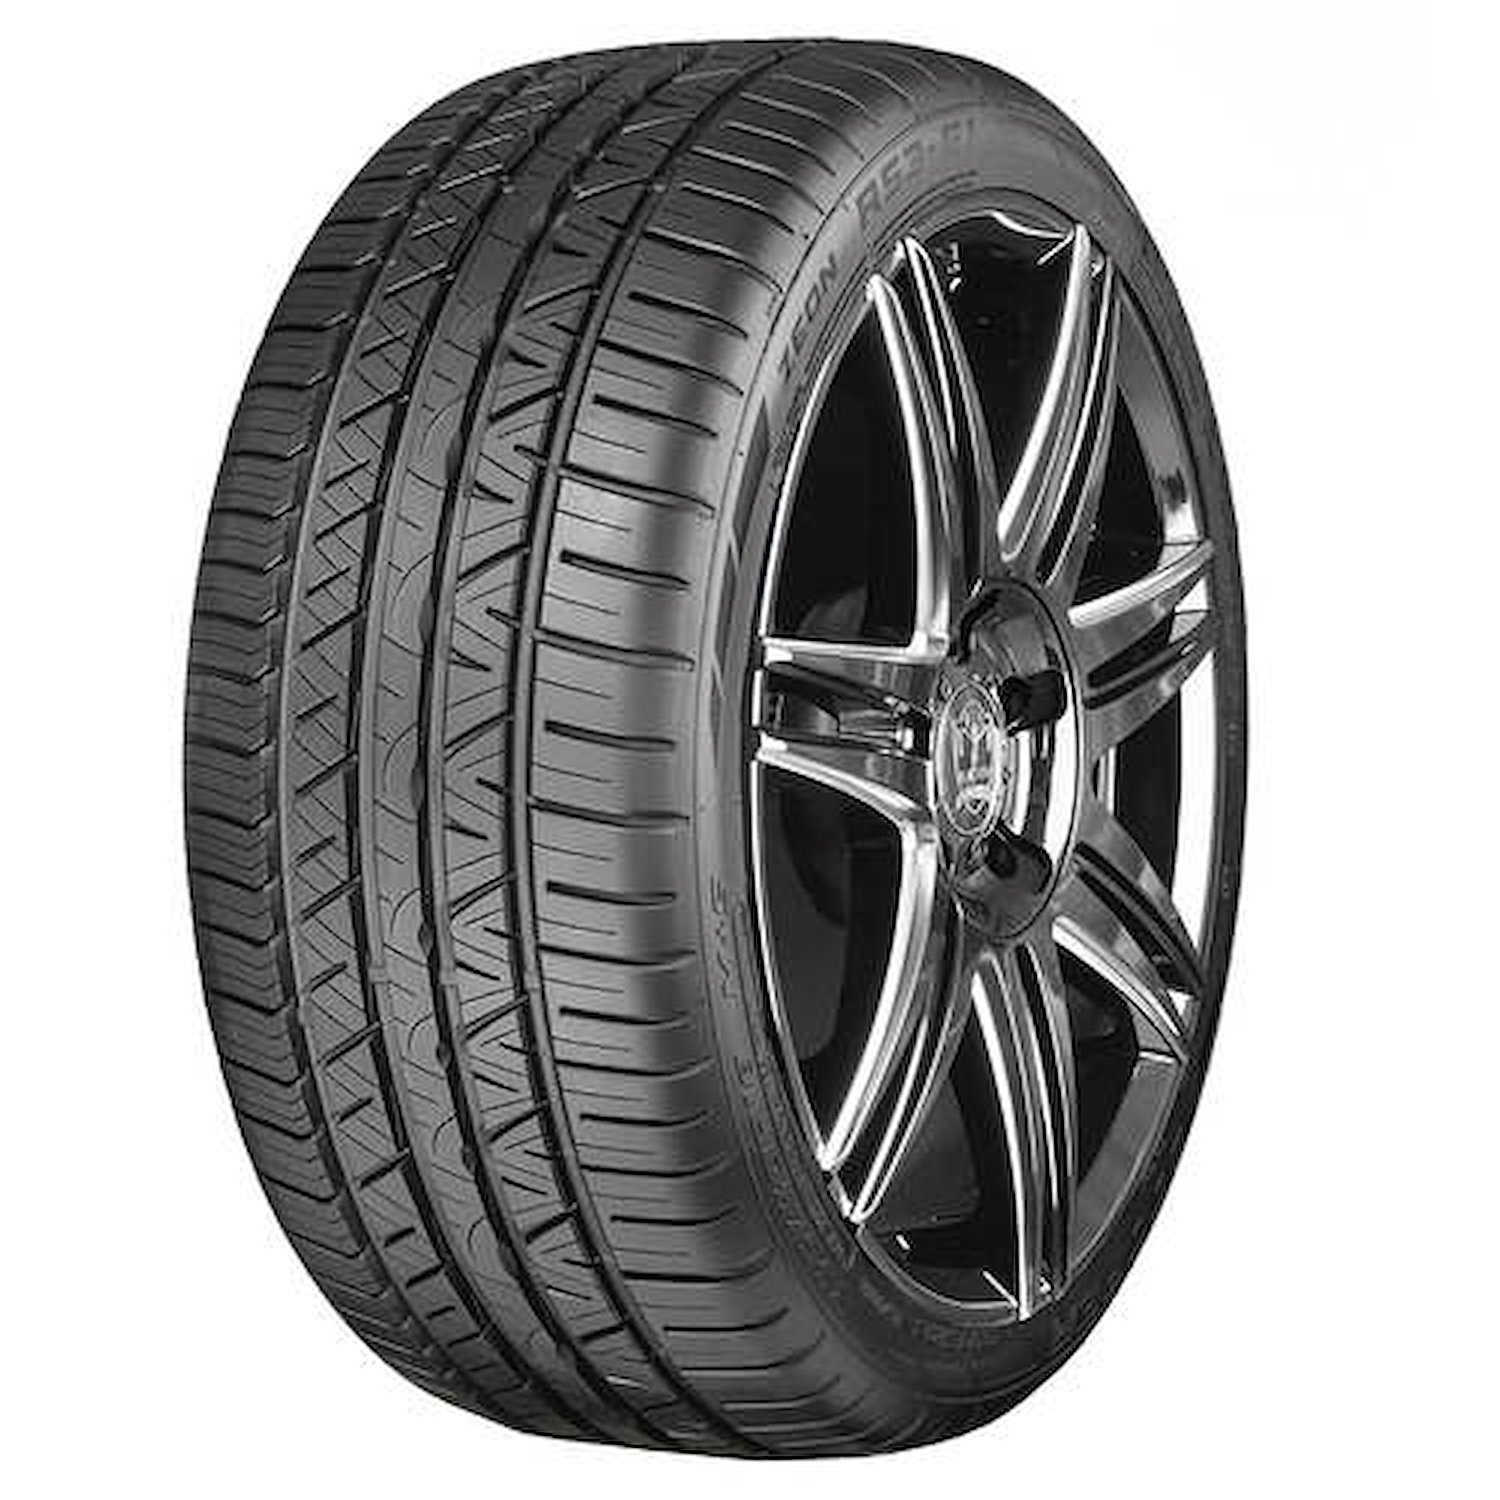 Zeon RS3-G1 High-Performance Tire, 205/55R16